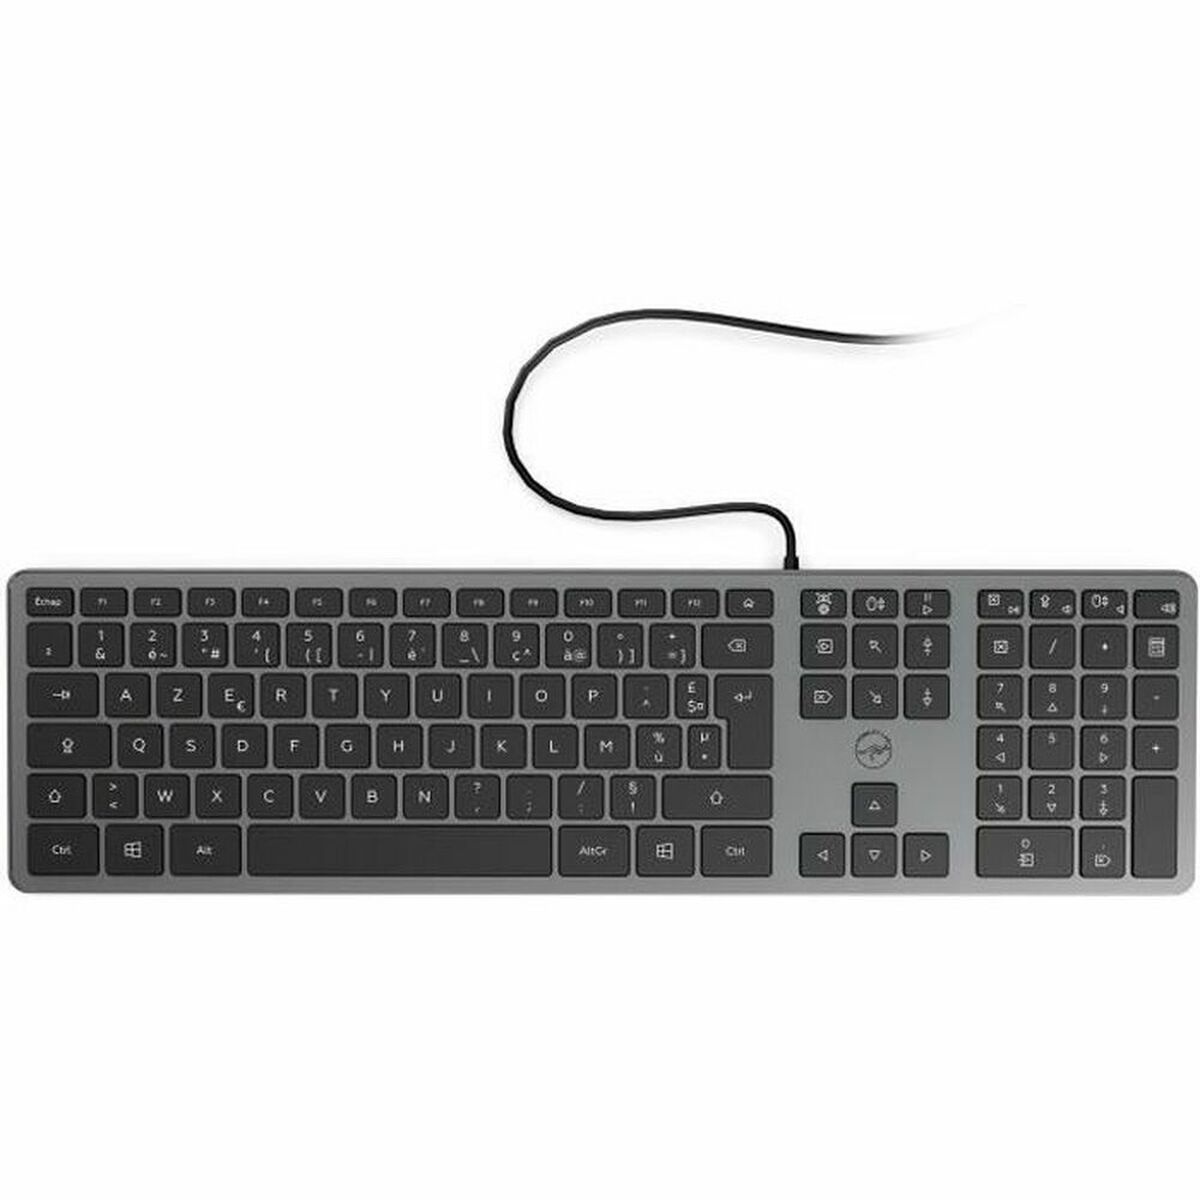 Bluetooth Keyboard with Support for Tablet Mobility Lab (Refurbished A)